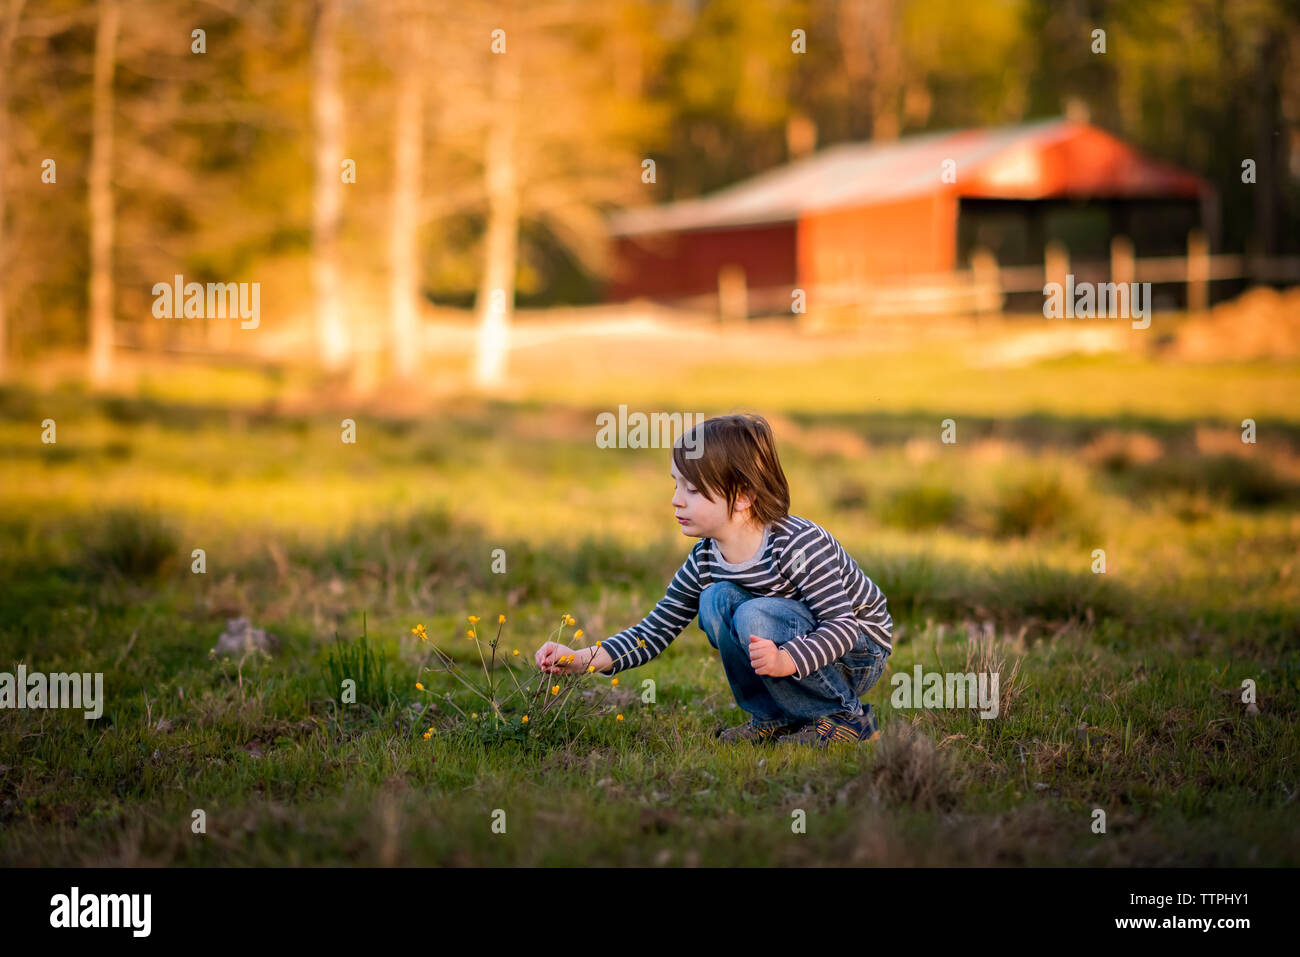 A Small Young Boy Picking Wildflowers On A Farm Stock Photo